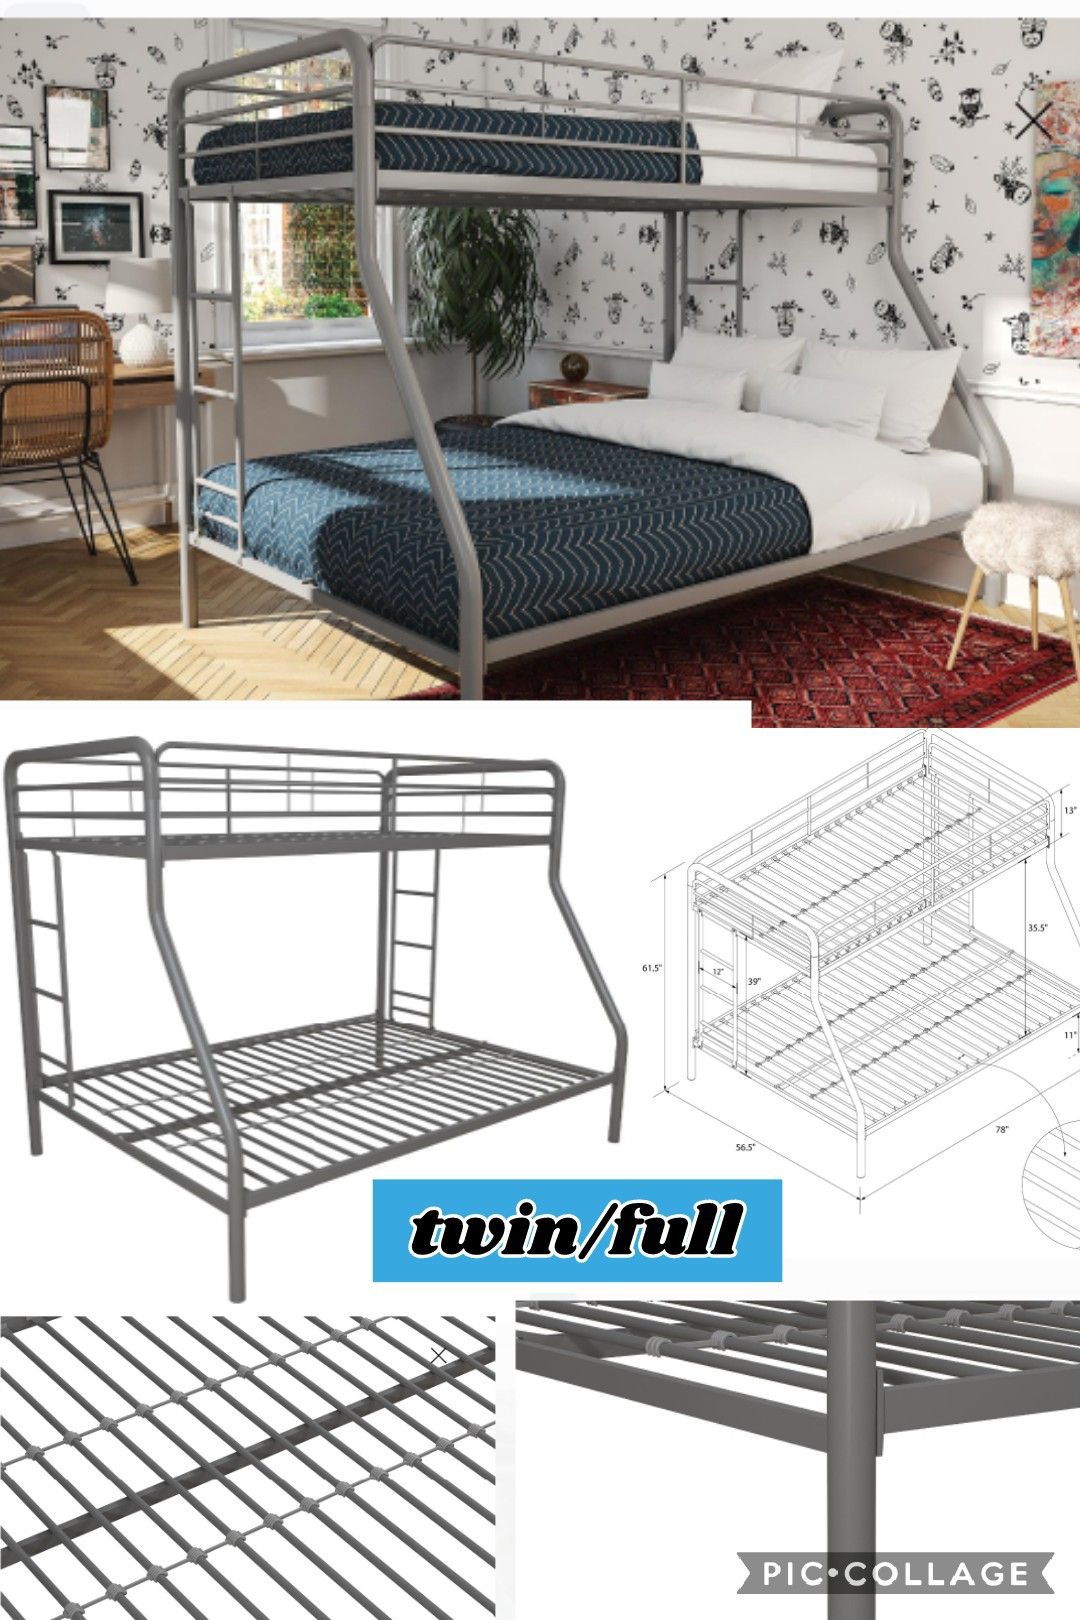 NEW BUNK BED